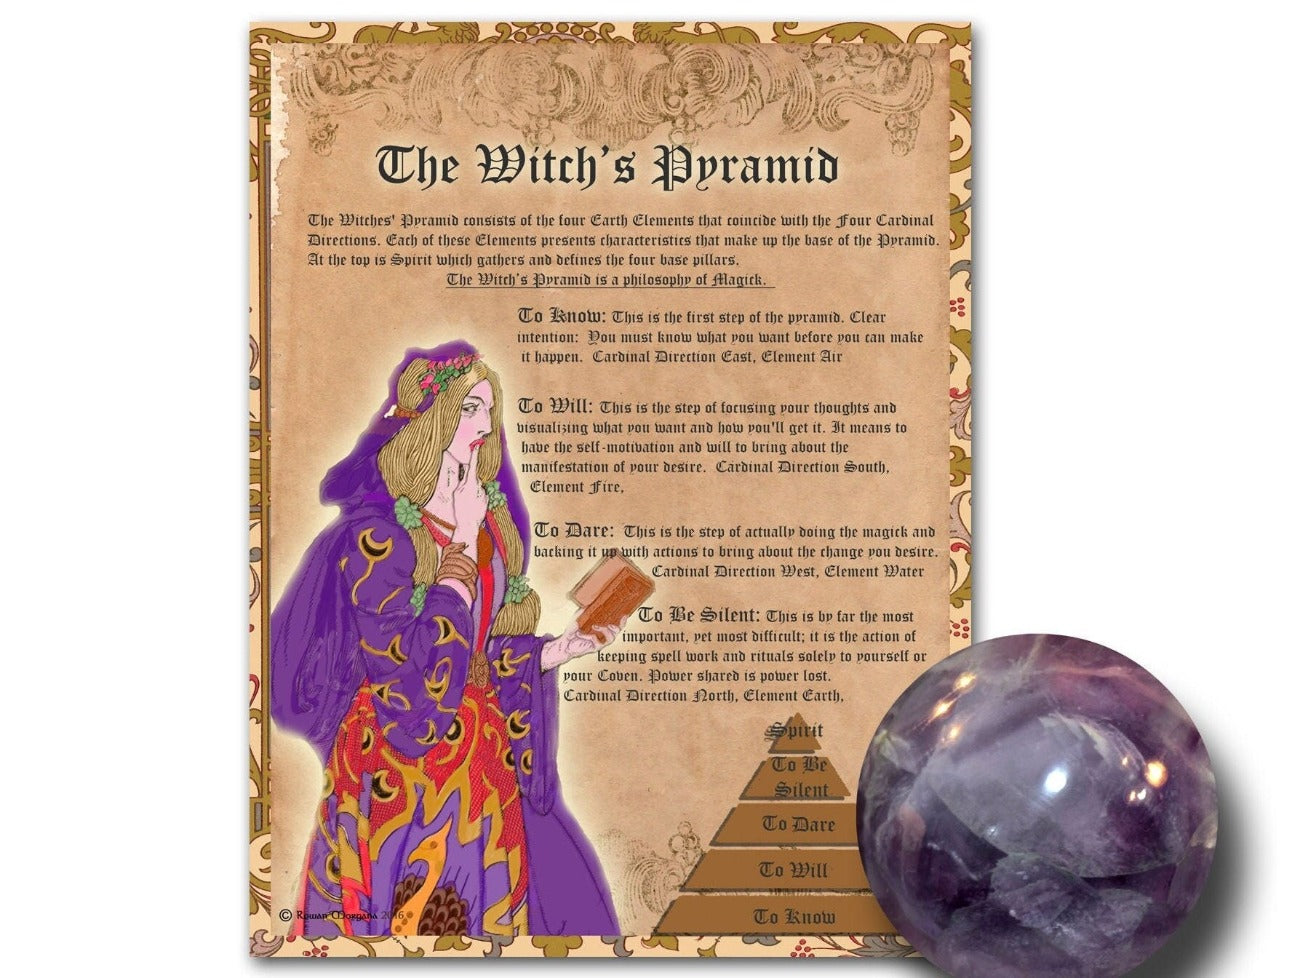 WITCHS PYRAMID, The Four Pillars of Witchcraft, Know Will Dare Keep Silent, Foundation of Magic and Casting Spells, Occult Ritual High Magic - Morgana Magick Spell